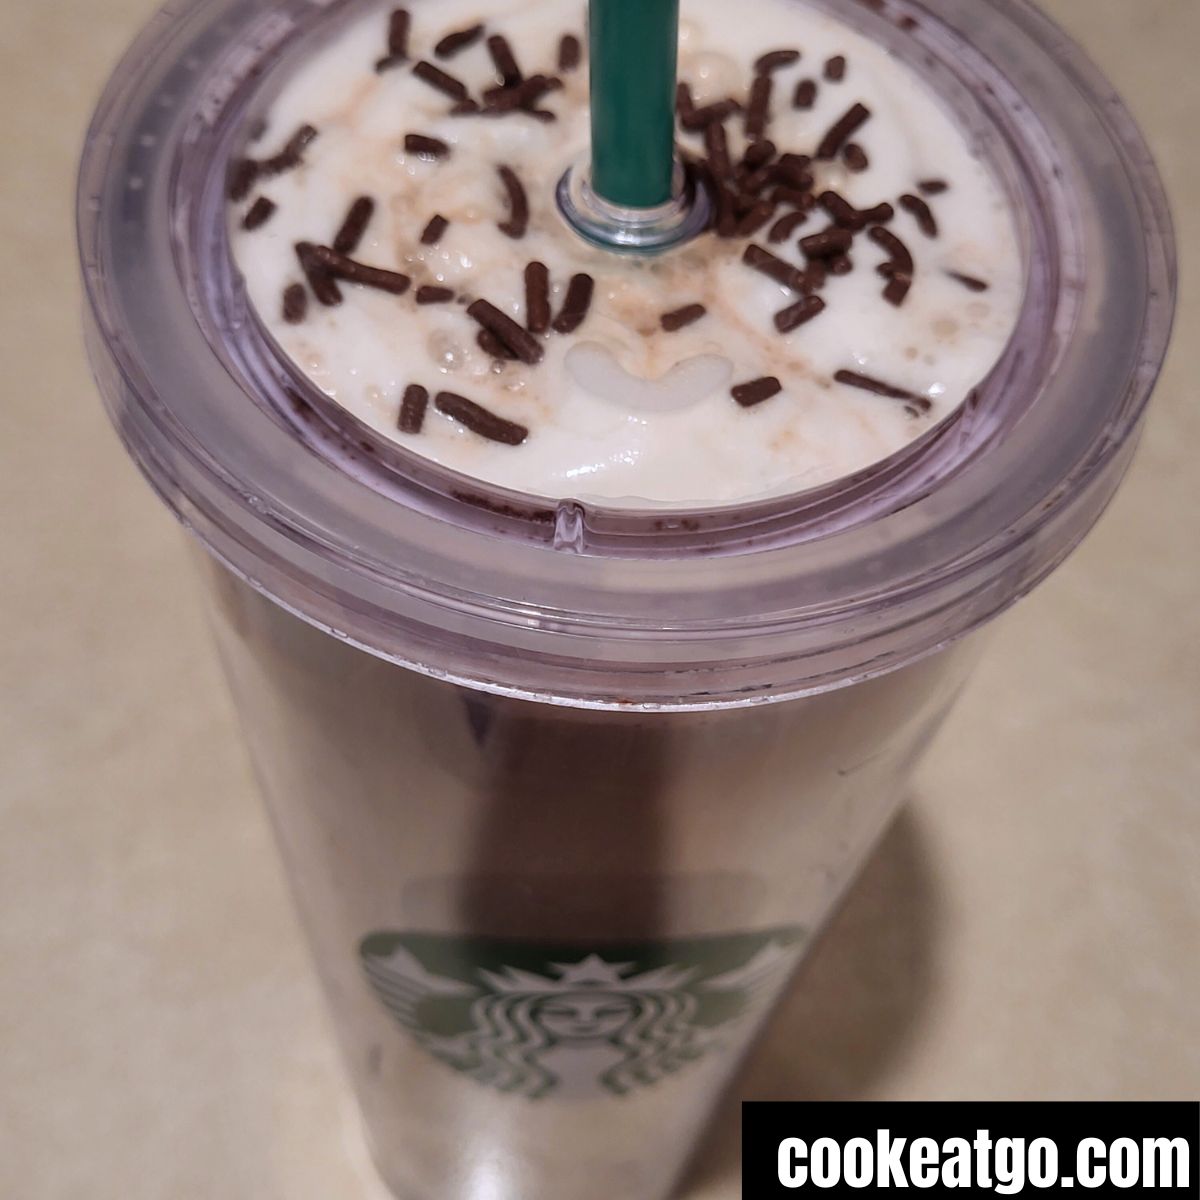 Starbucks cup with skinny peppermint mocha latte served with whipped toping and chocolate sprinkles